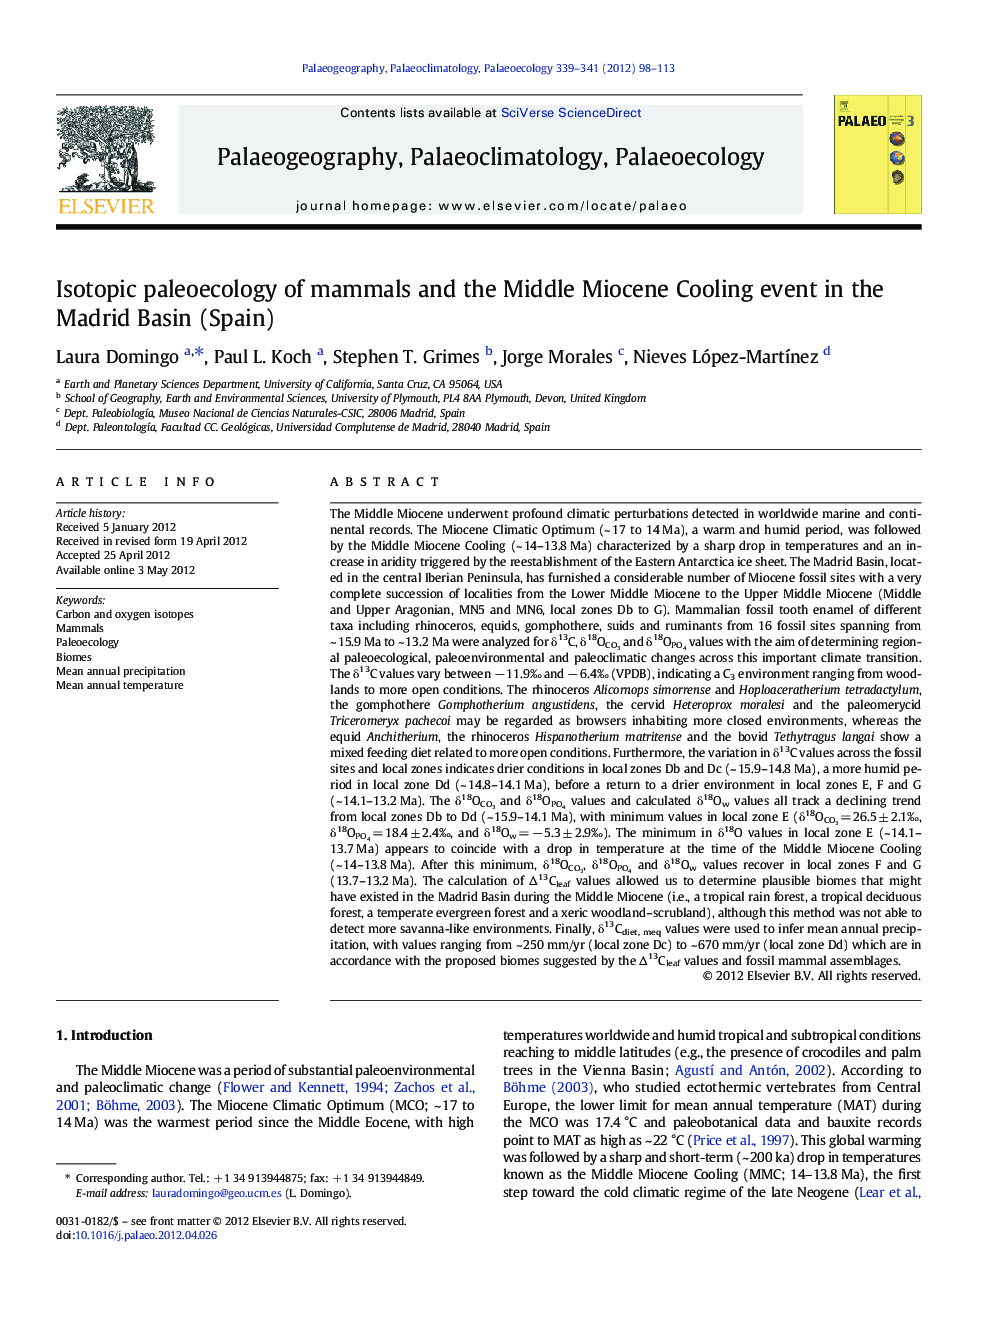 Isotopic paleoecology of mammals and the Middle Miocene Cooling event in the Madrid Basin (Spain)